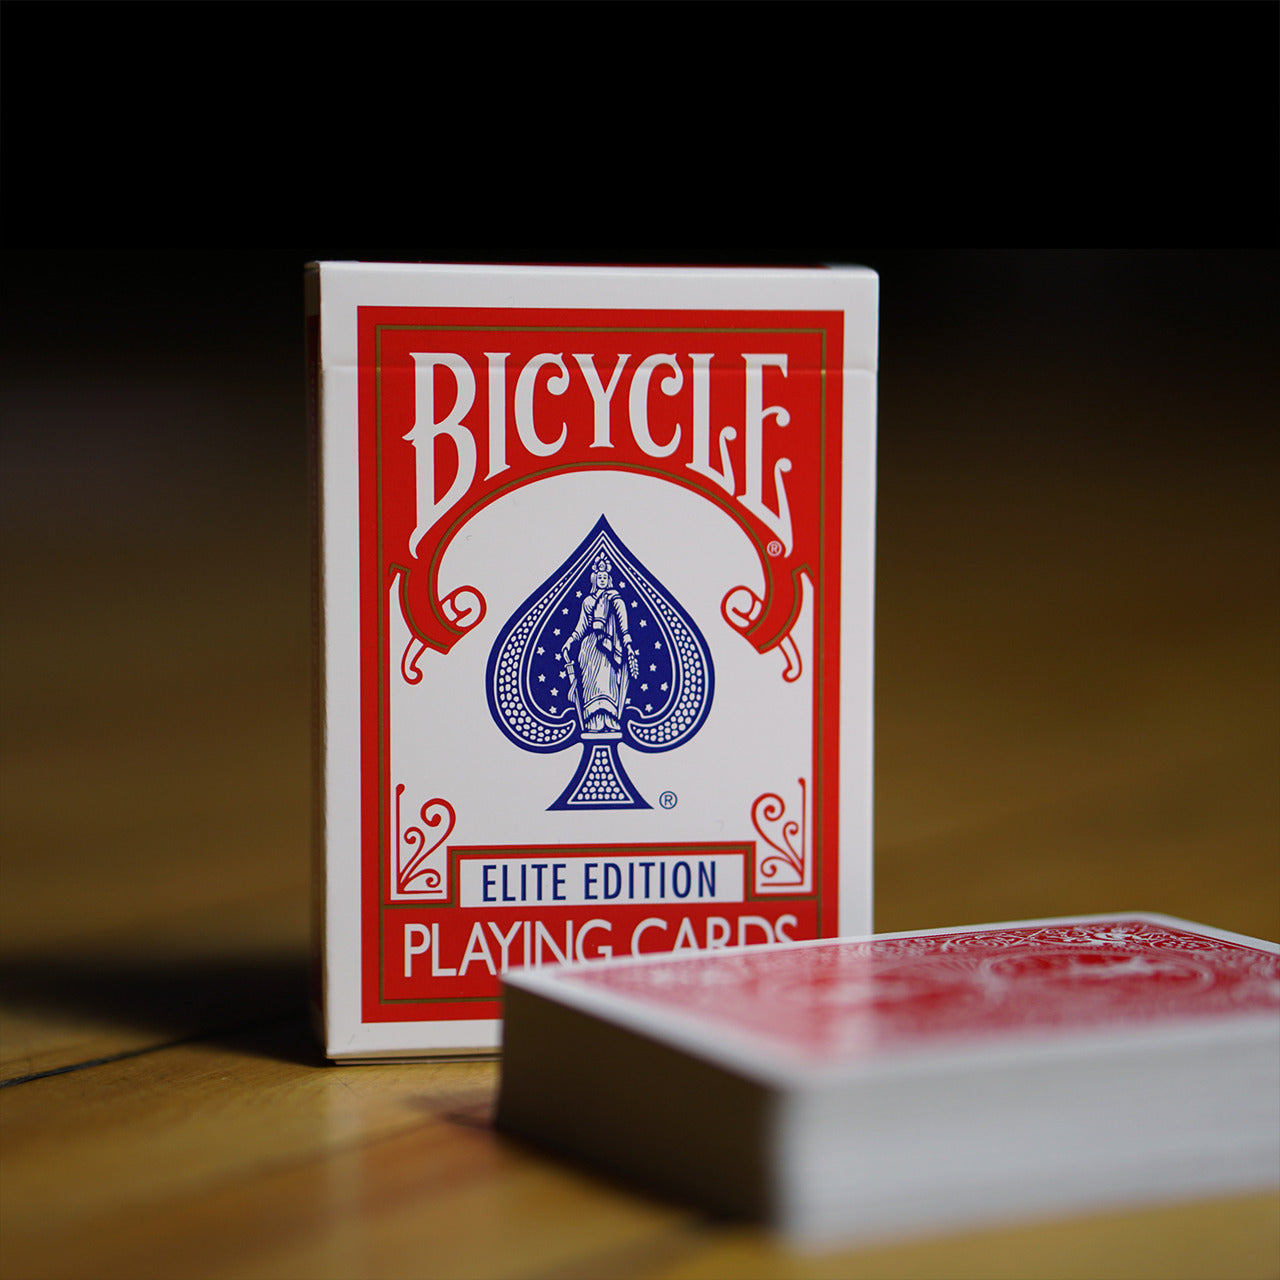 Bicycle Elite Edition Playing Cards, Red